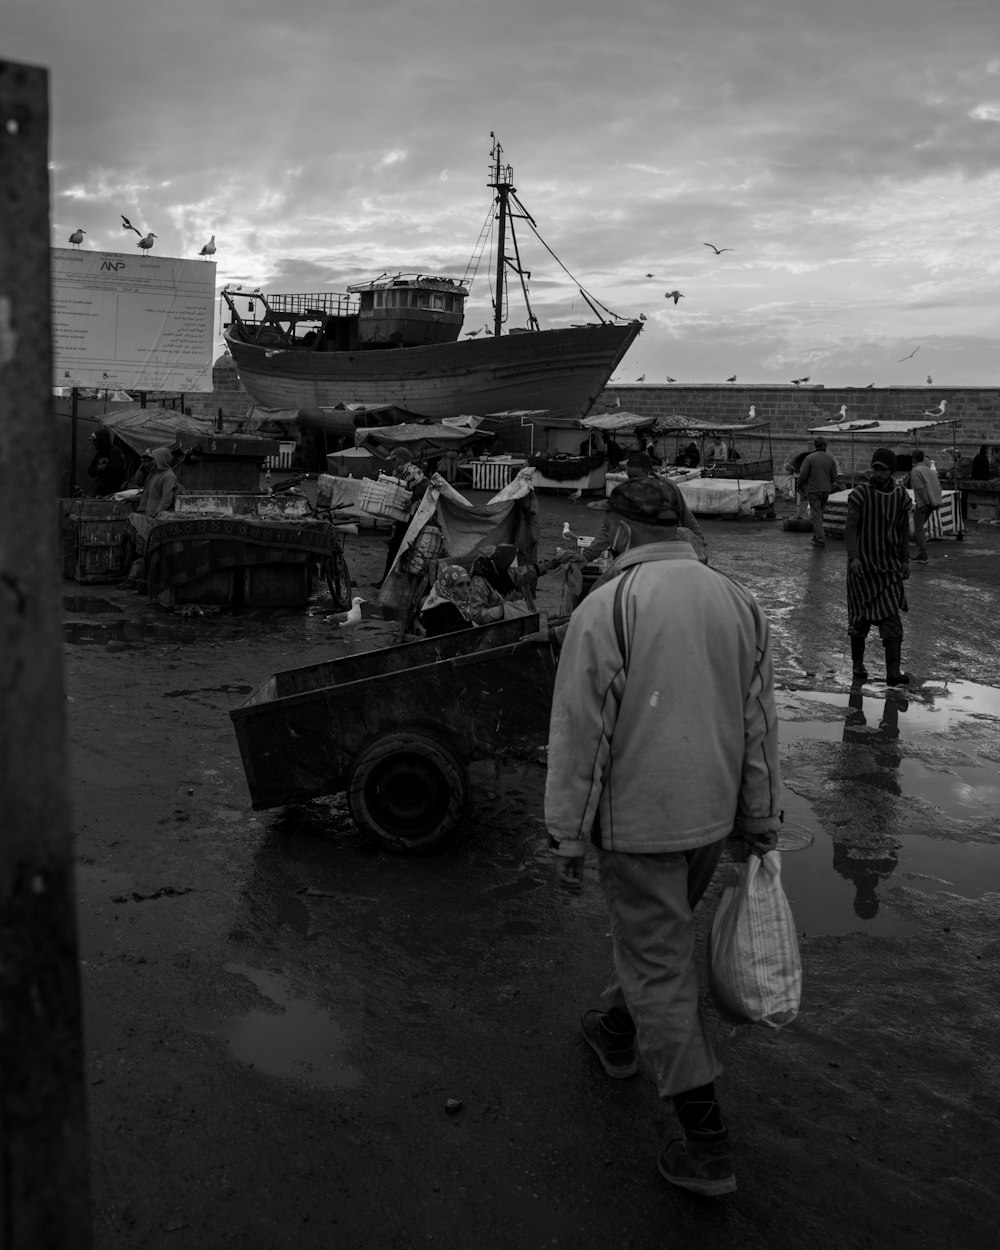 a black and white photo of people walking near a boat